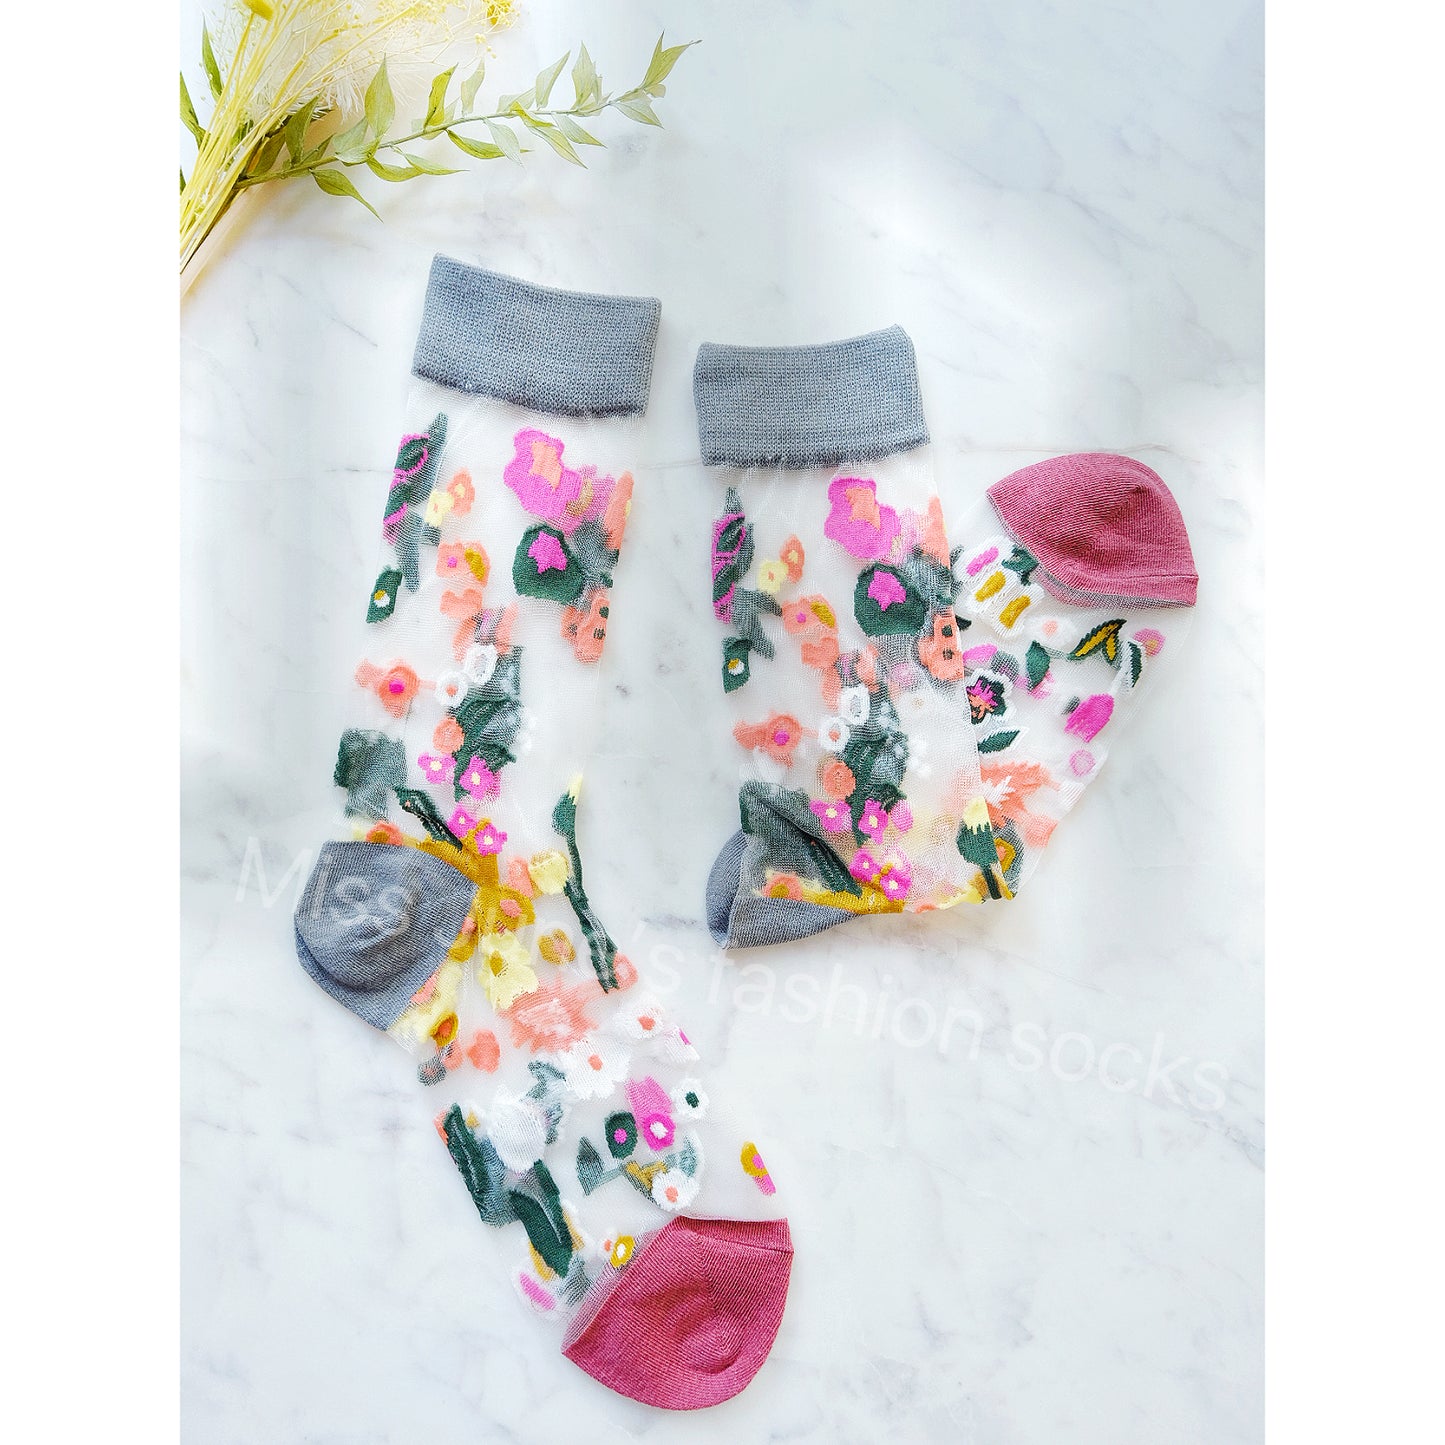 Miss June’s | Women’s Glass Silk-like Transparent socks | Cute | Colorful | Summer | Patterned | Gift Idea | Casual | Comfortable | Floral |